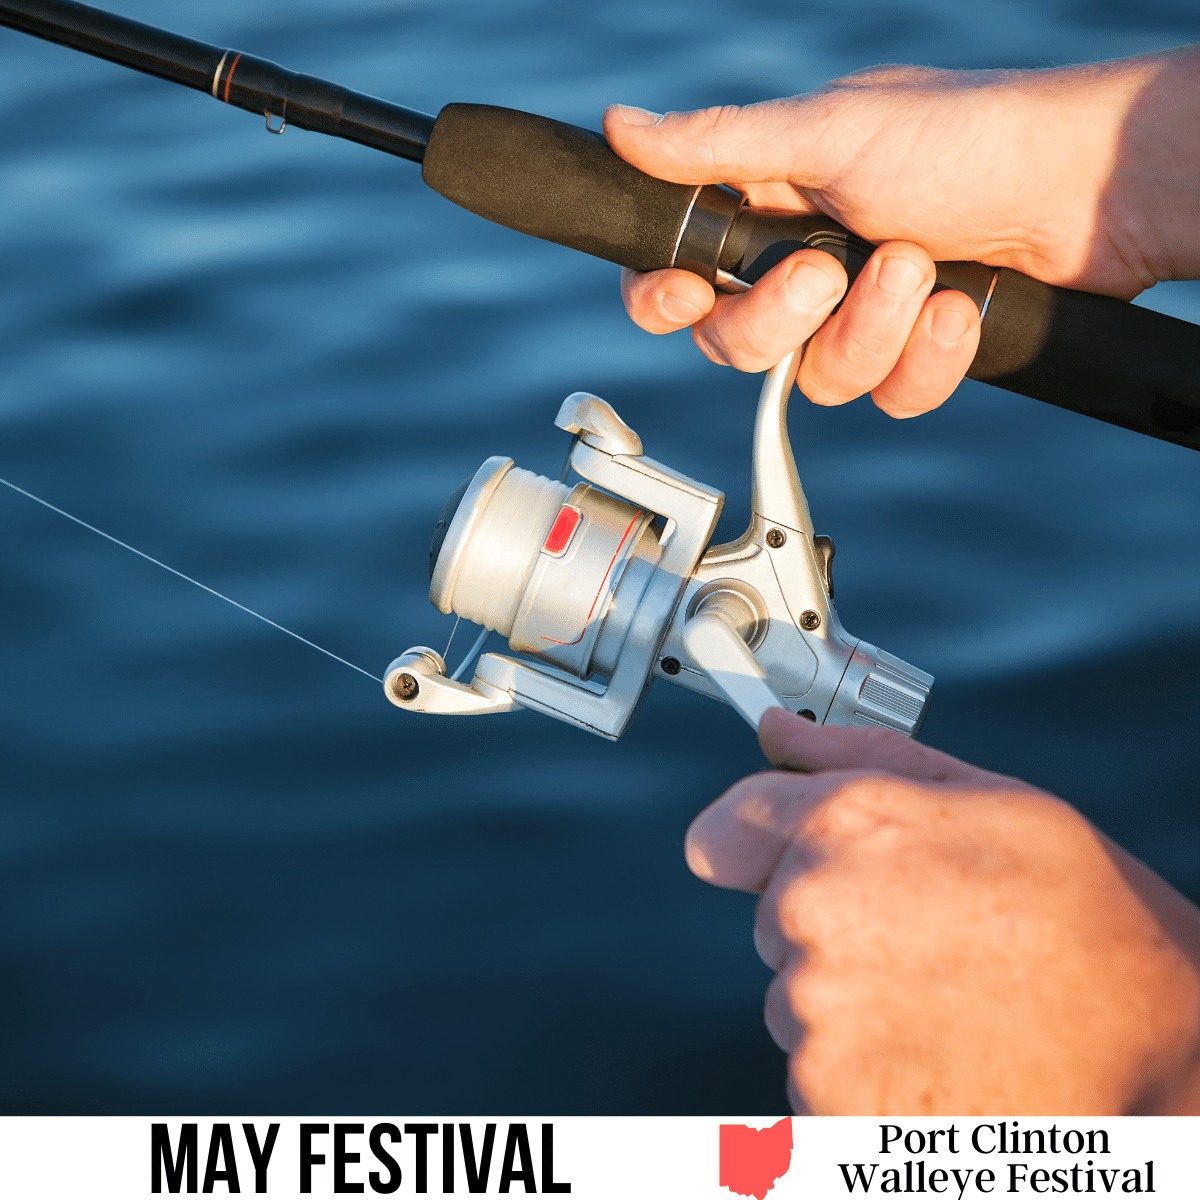 A square image of a close-up photo of hands holding a fishing rod. A white strip across the bottom has text May Festival Port Clinton Walleye Festival.